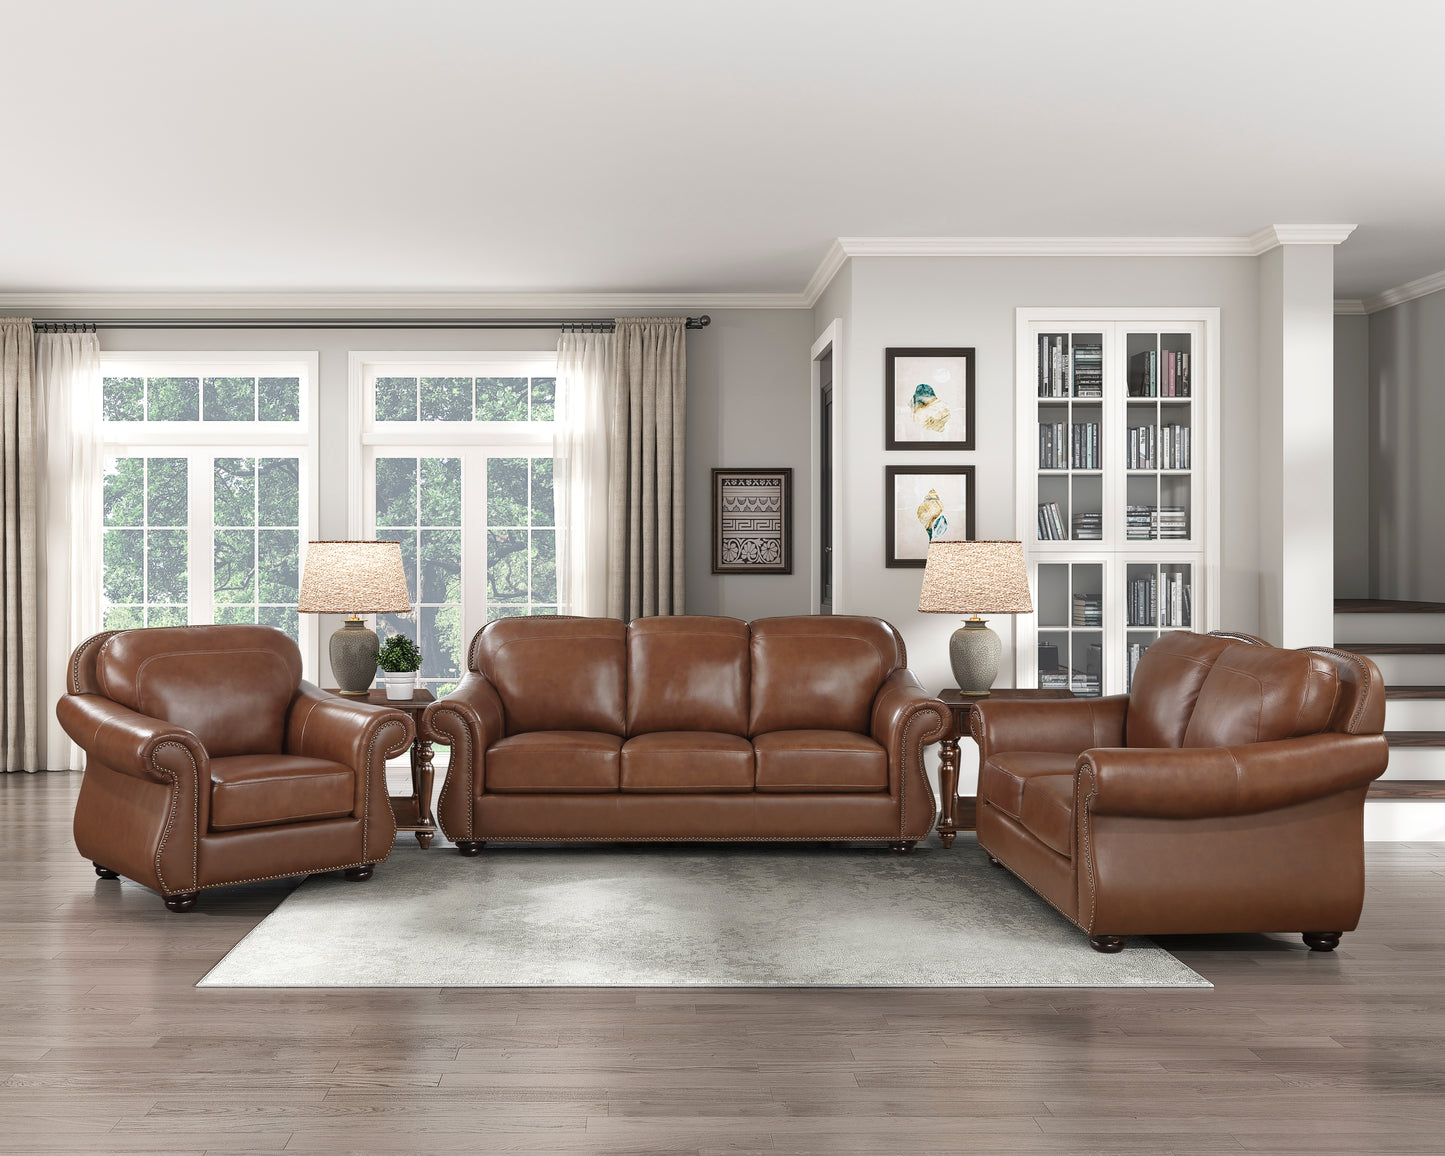 Attleboro Top Grain Leather Sofa ONE COLOR ONLY